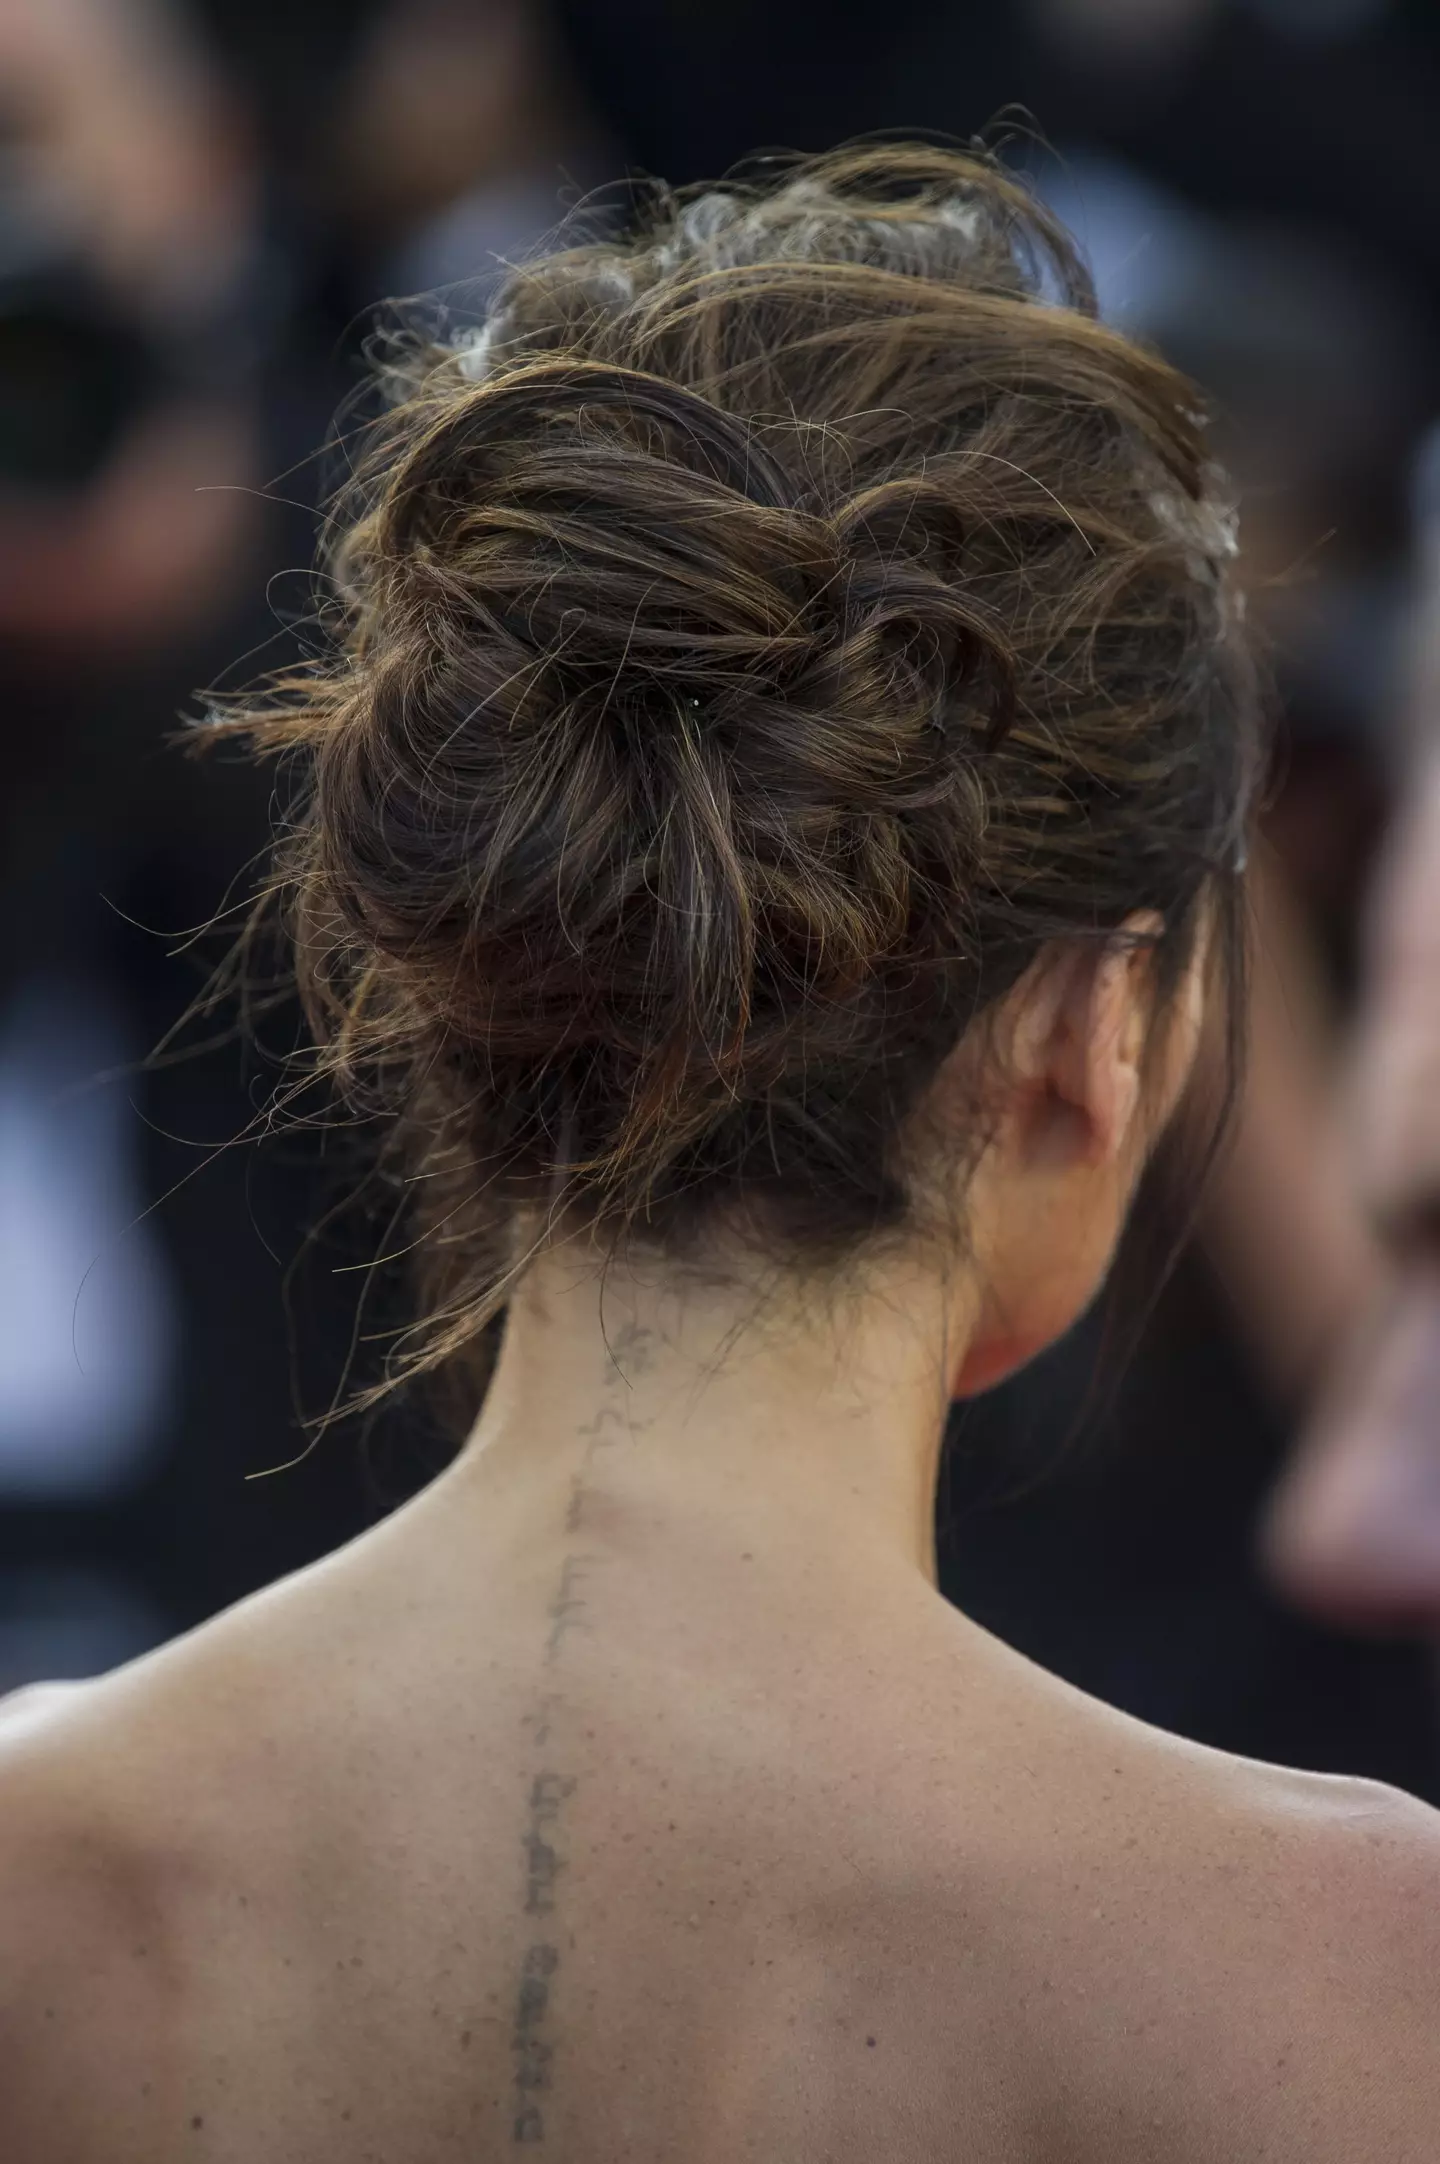 Victoria's back tattoo has also been removed.